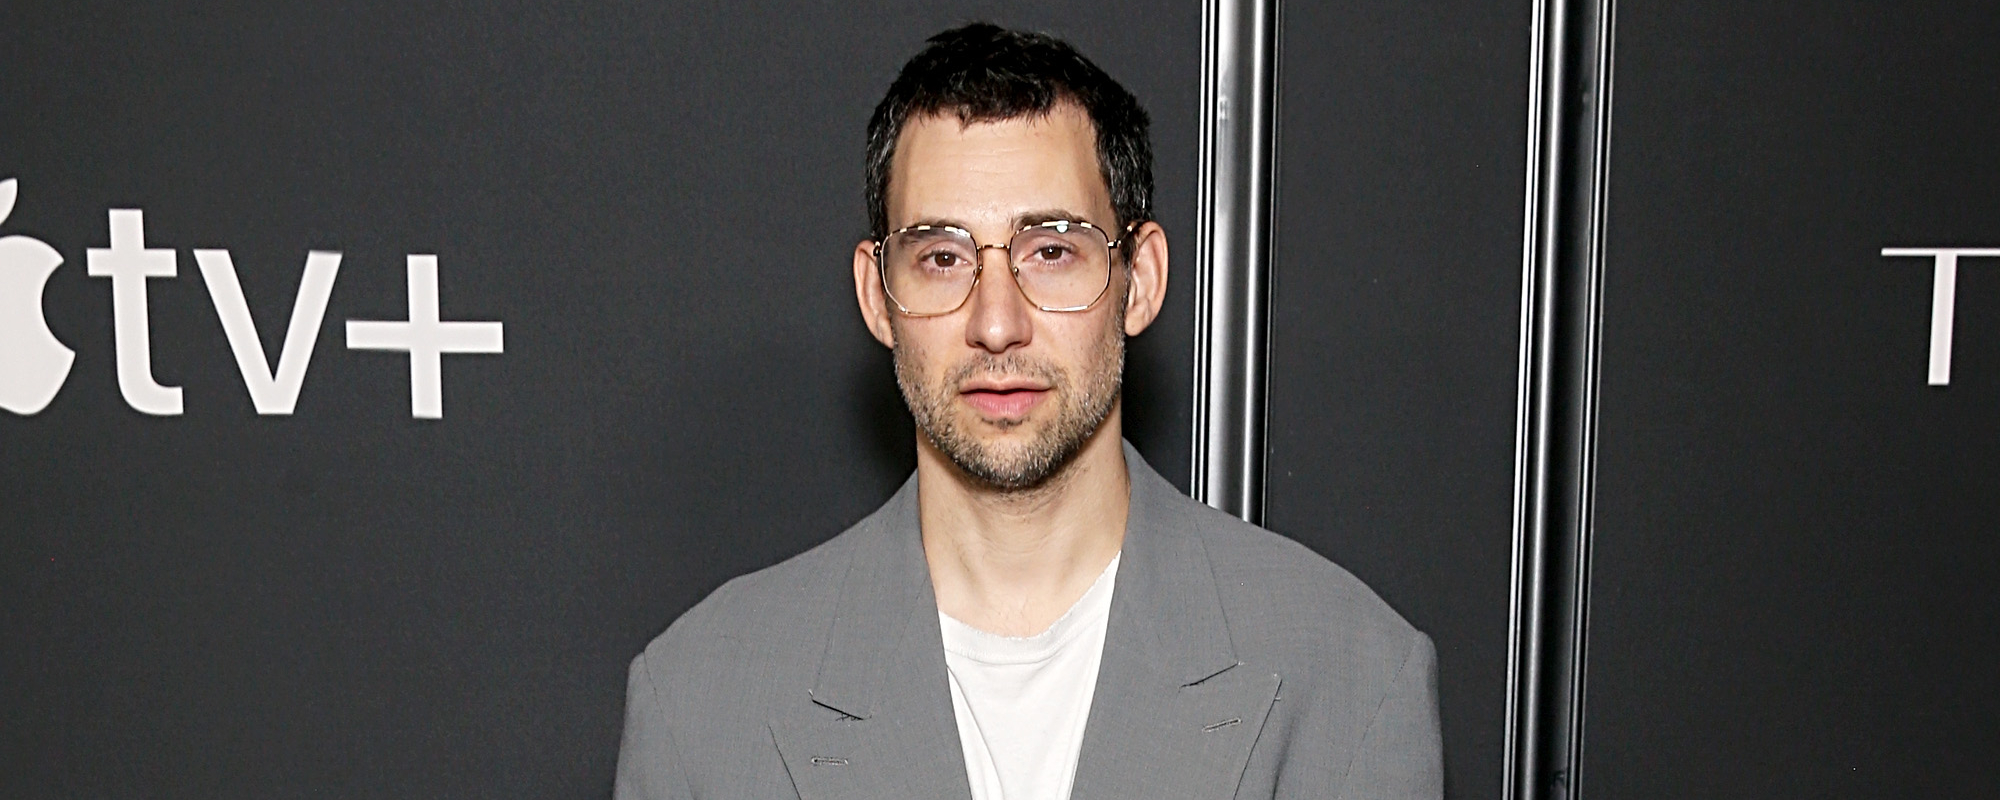 Jack Antonoff Defends Taylor Swift From Critics: ”You’re Toast to Me”